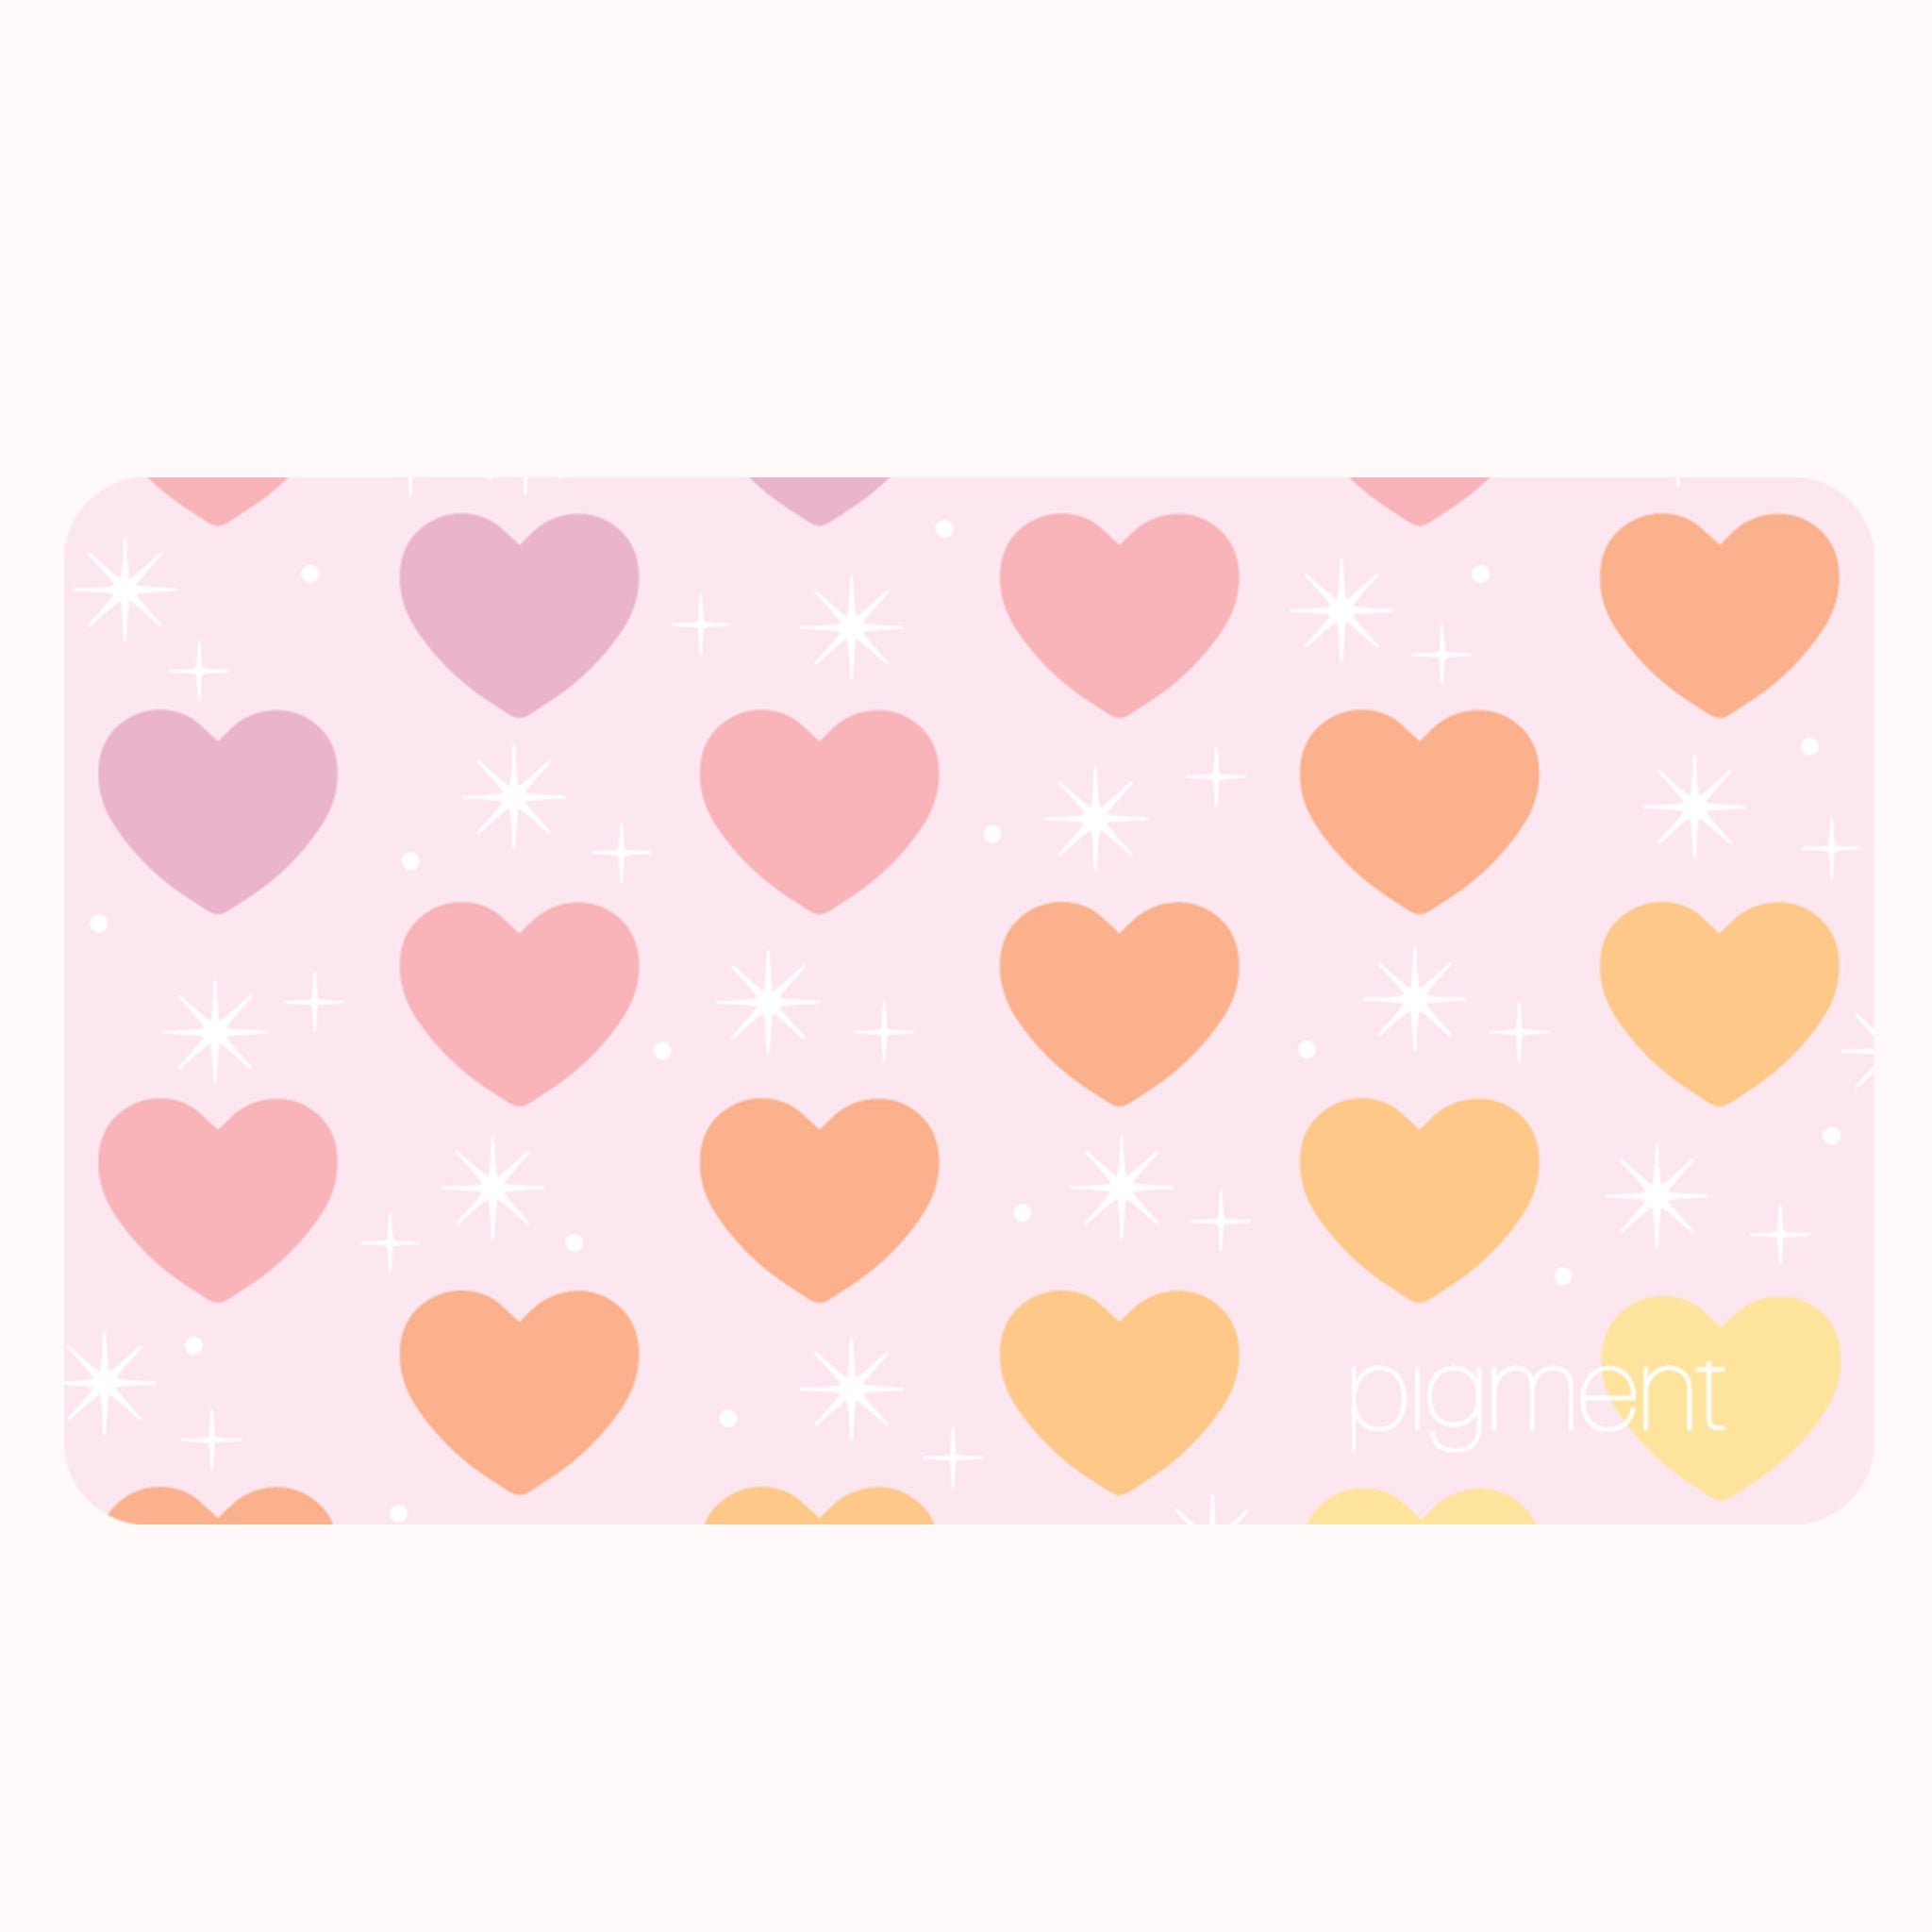 On a white background is a soft pink gift card with multicolored hearts and white detail sparkles along with white small text in the bottom right corner that reads, &quot;Pigment&quot;.